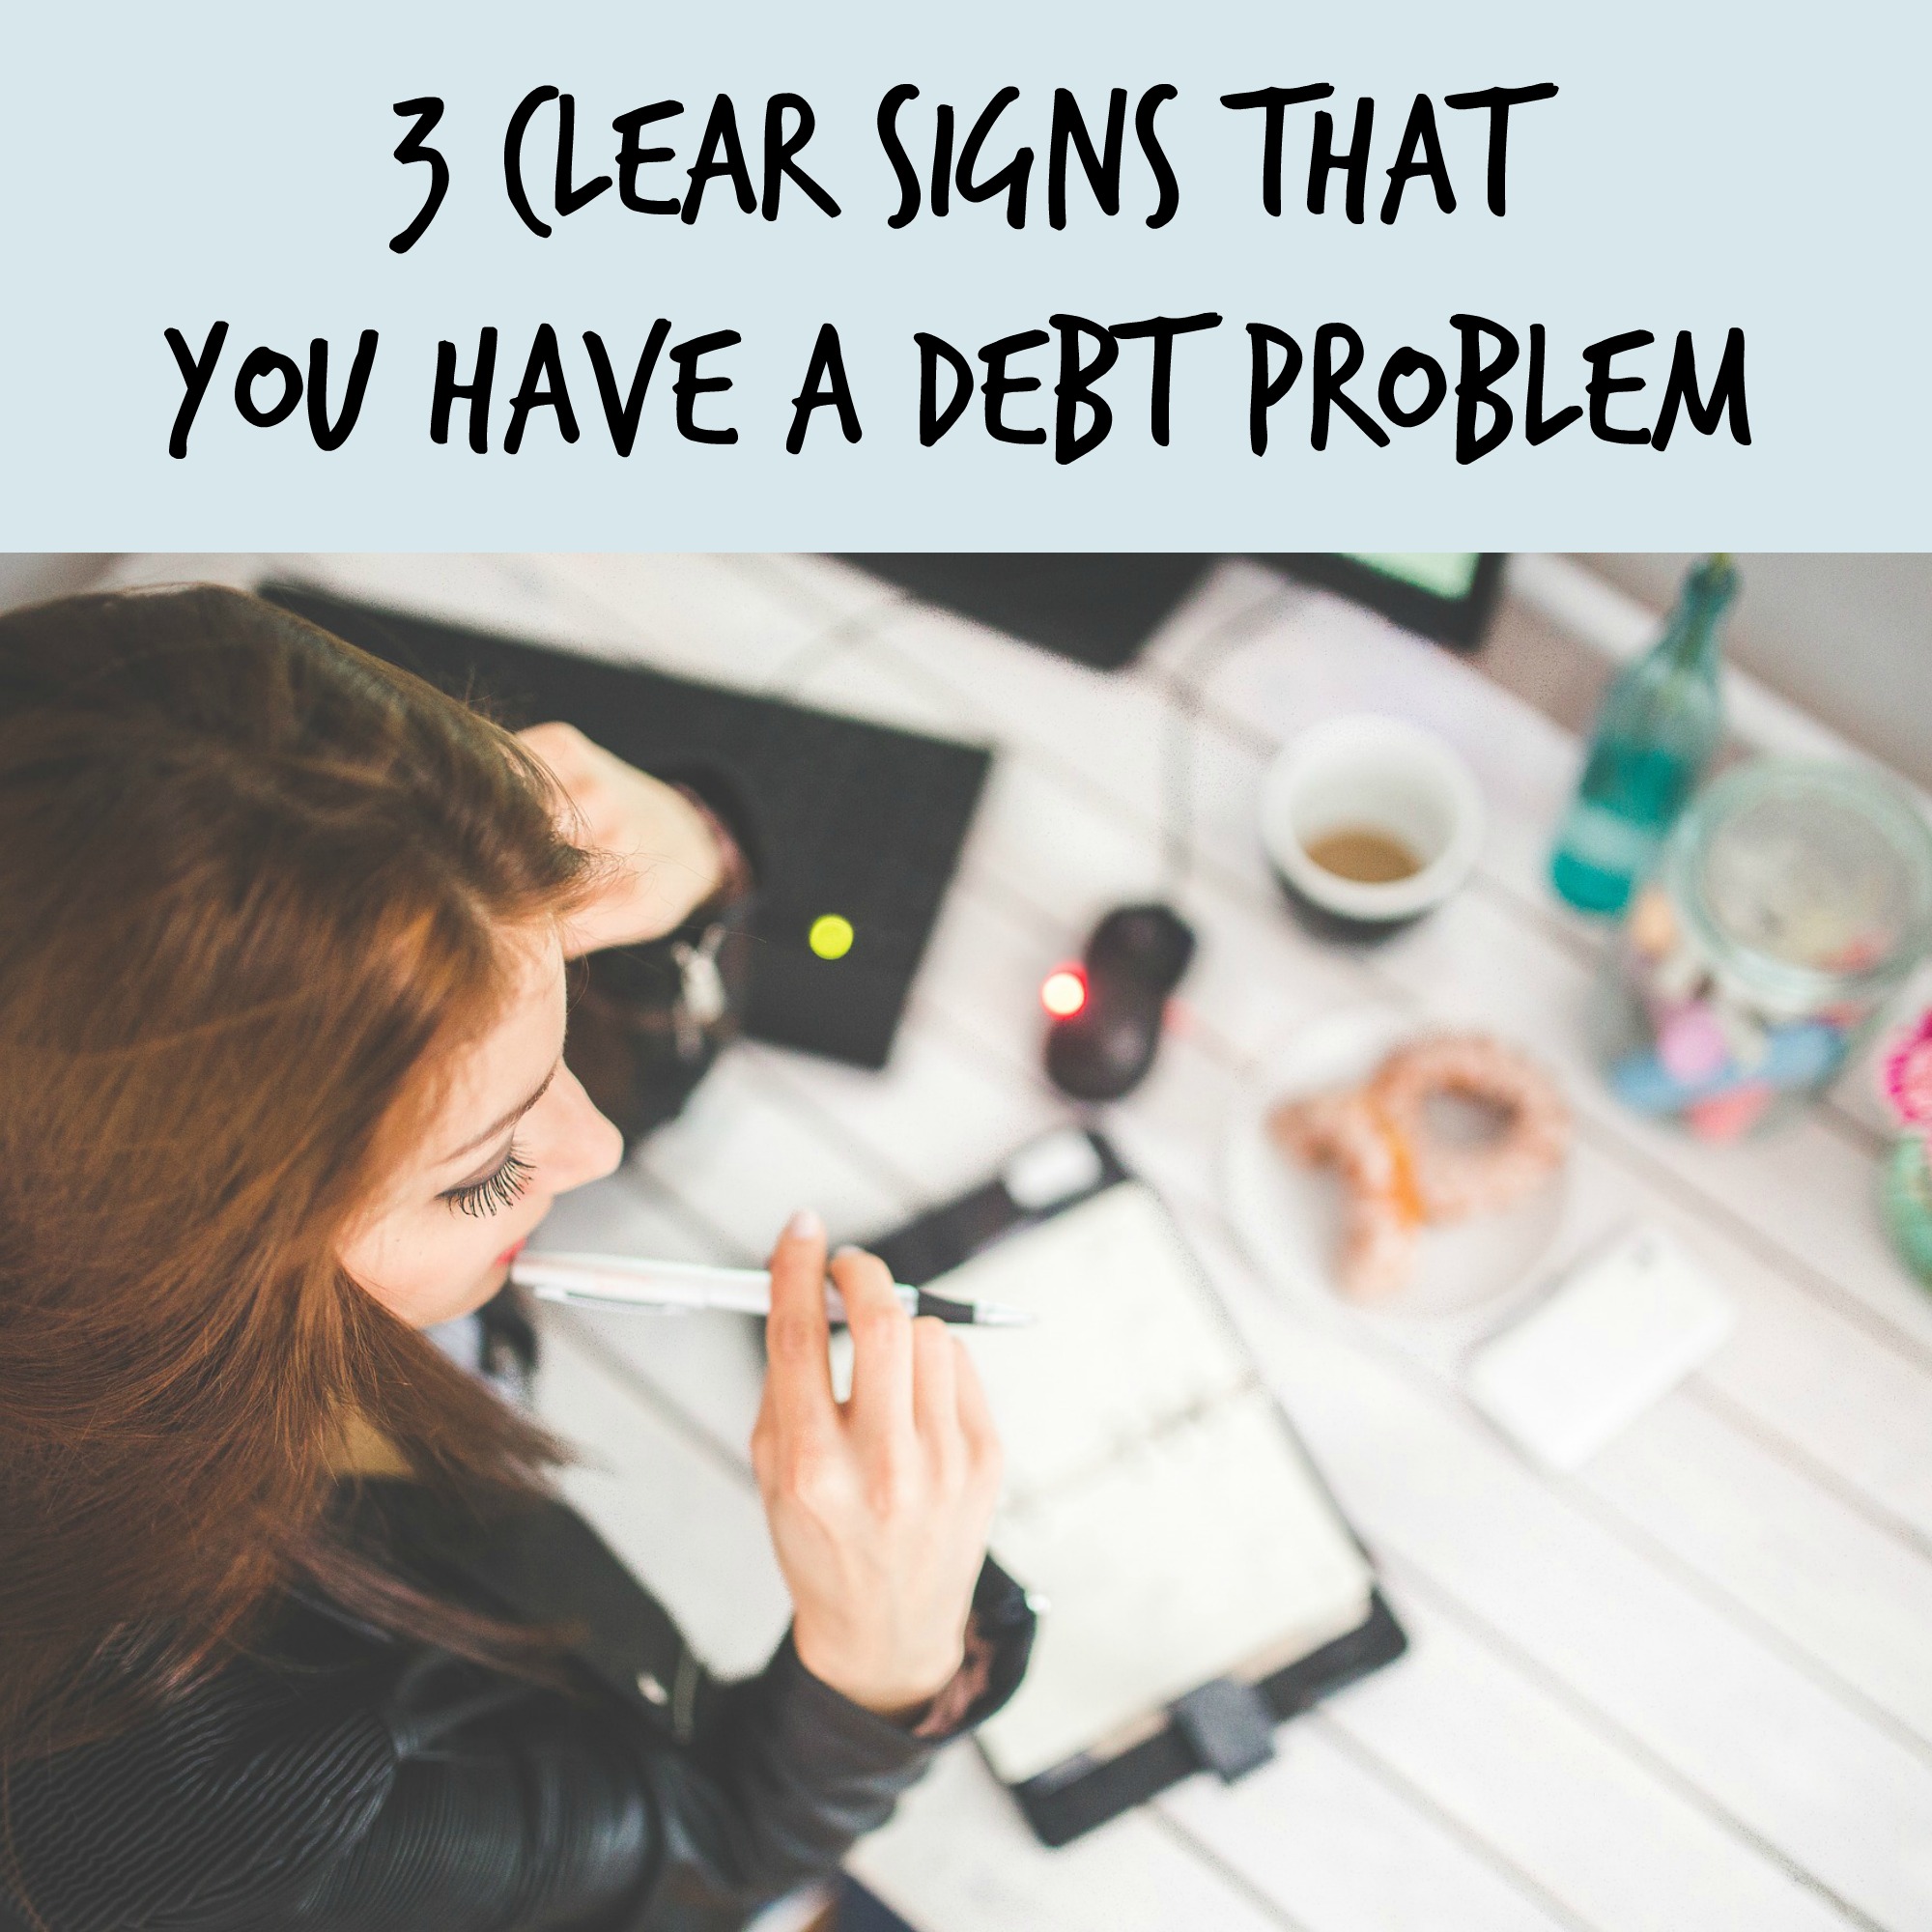 3 Clear Signs That You Have a Debt Problem